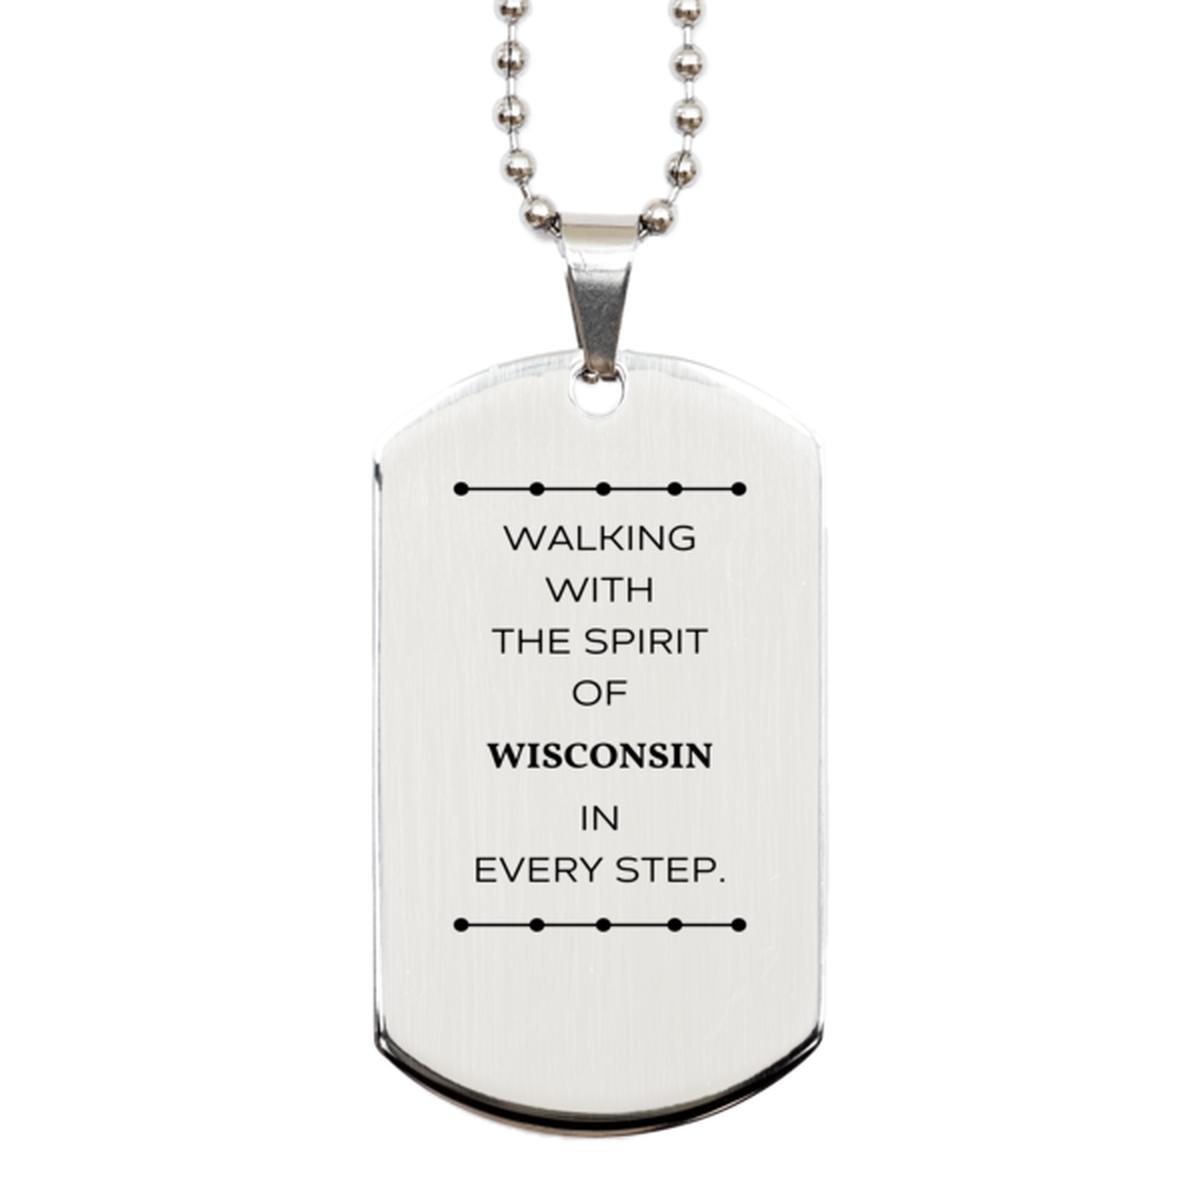 Wisconsin Gifts, Walking with the spirit, Love Wisconsin Birthday Christmas Silver Dog Tag For Wisconsin People, Men, Women, Friends